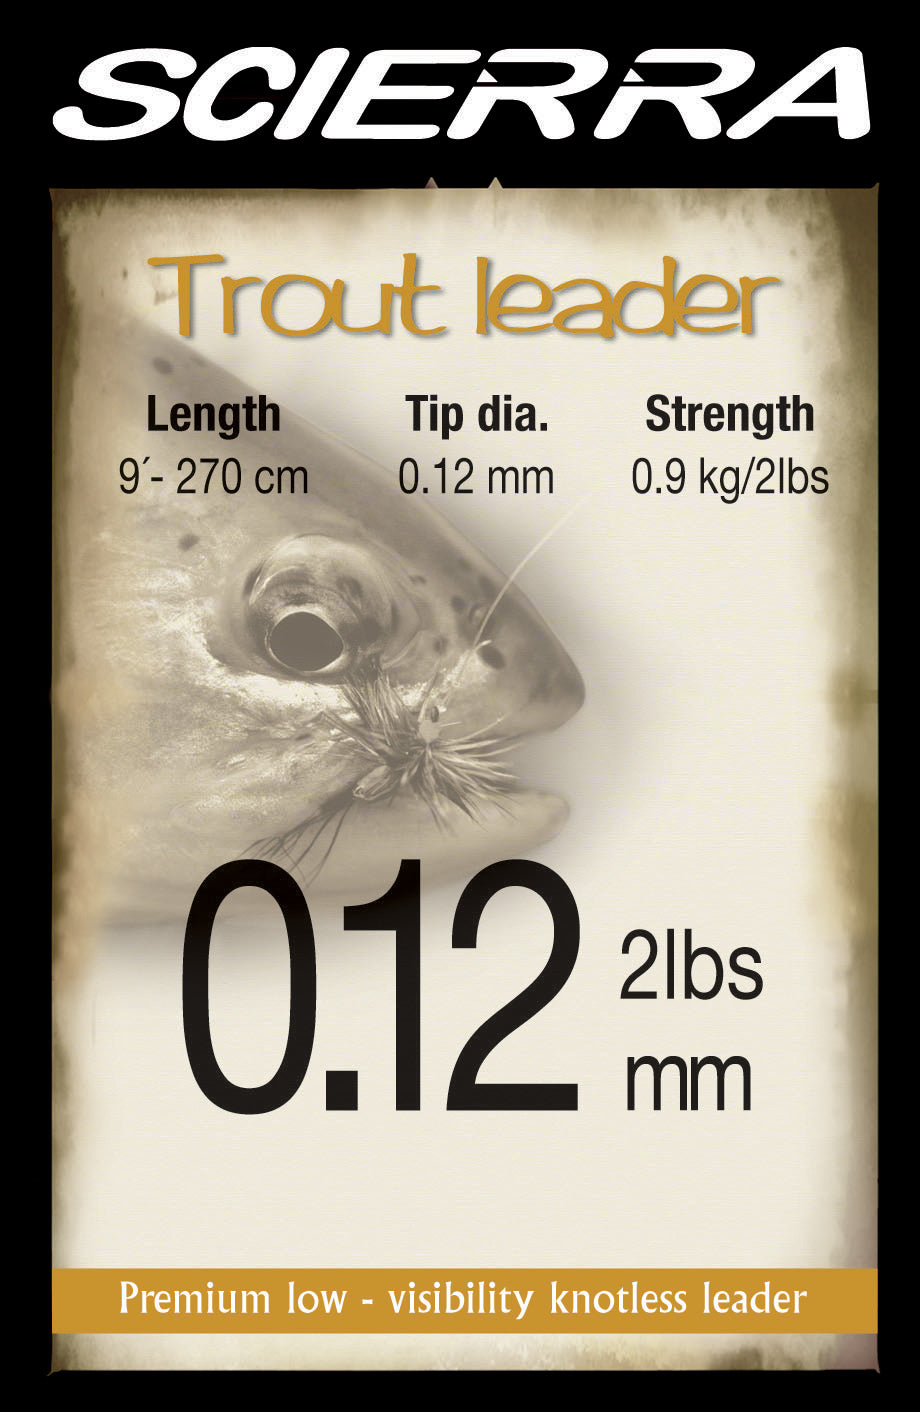 THE TROUT LEADER